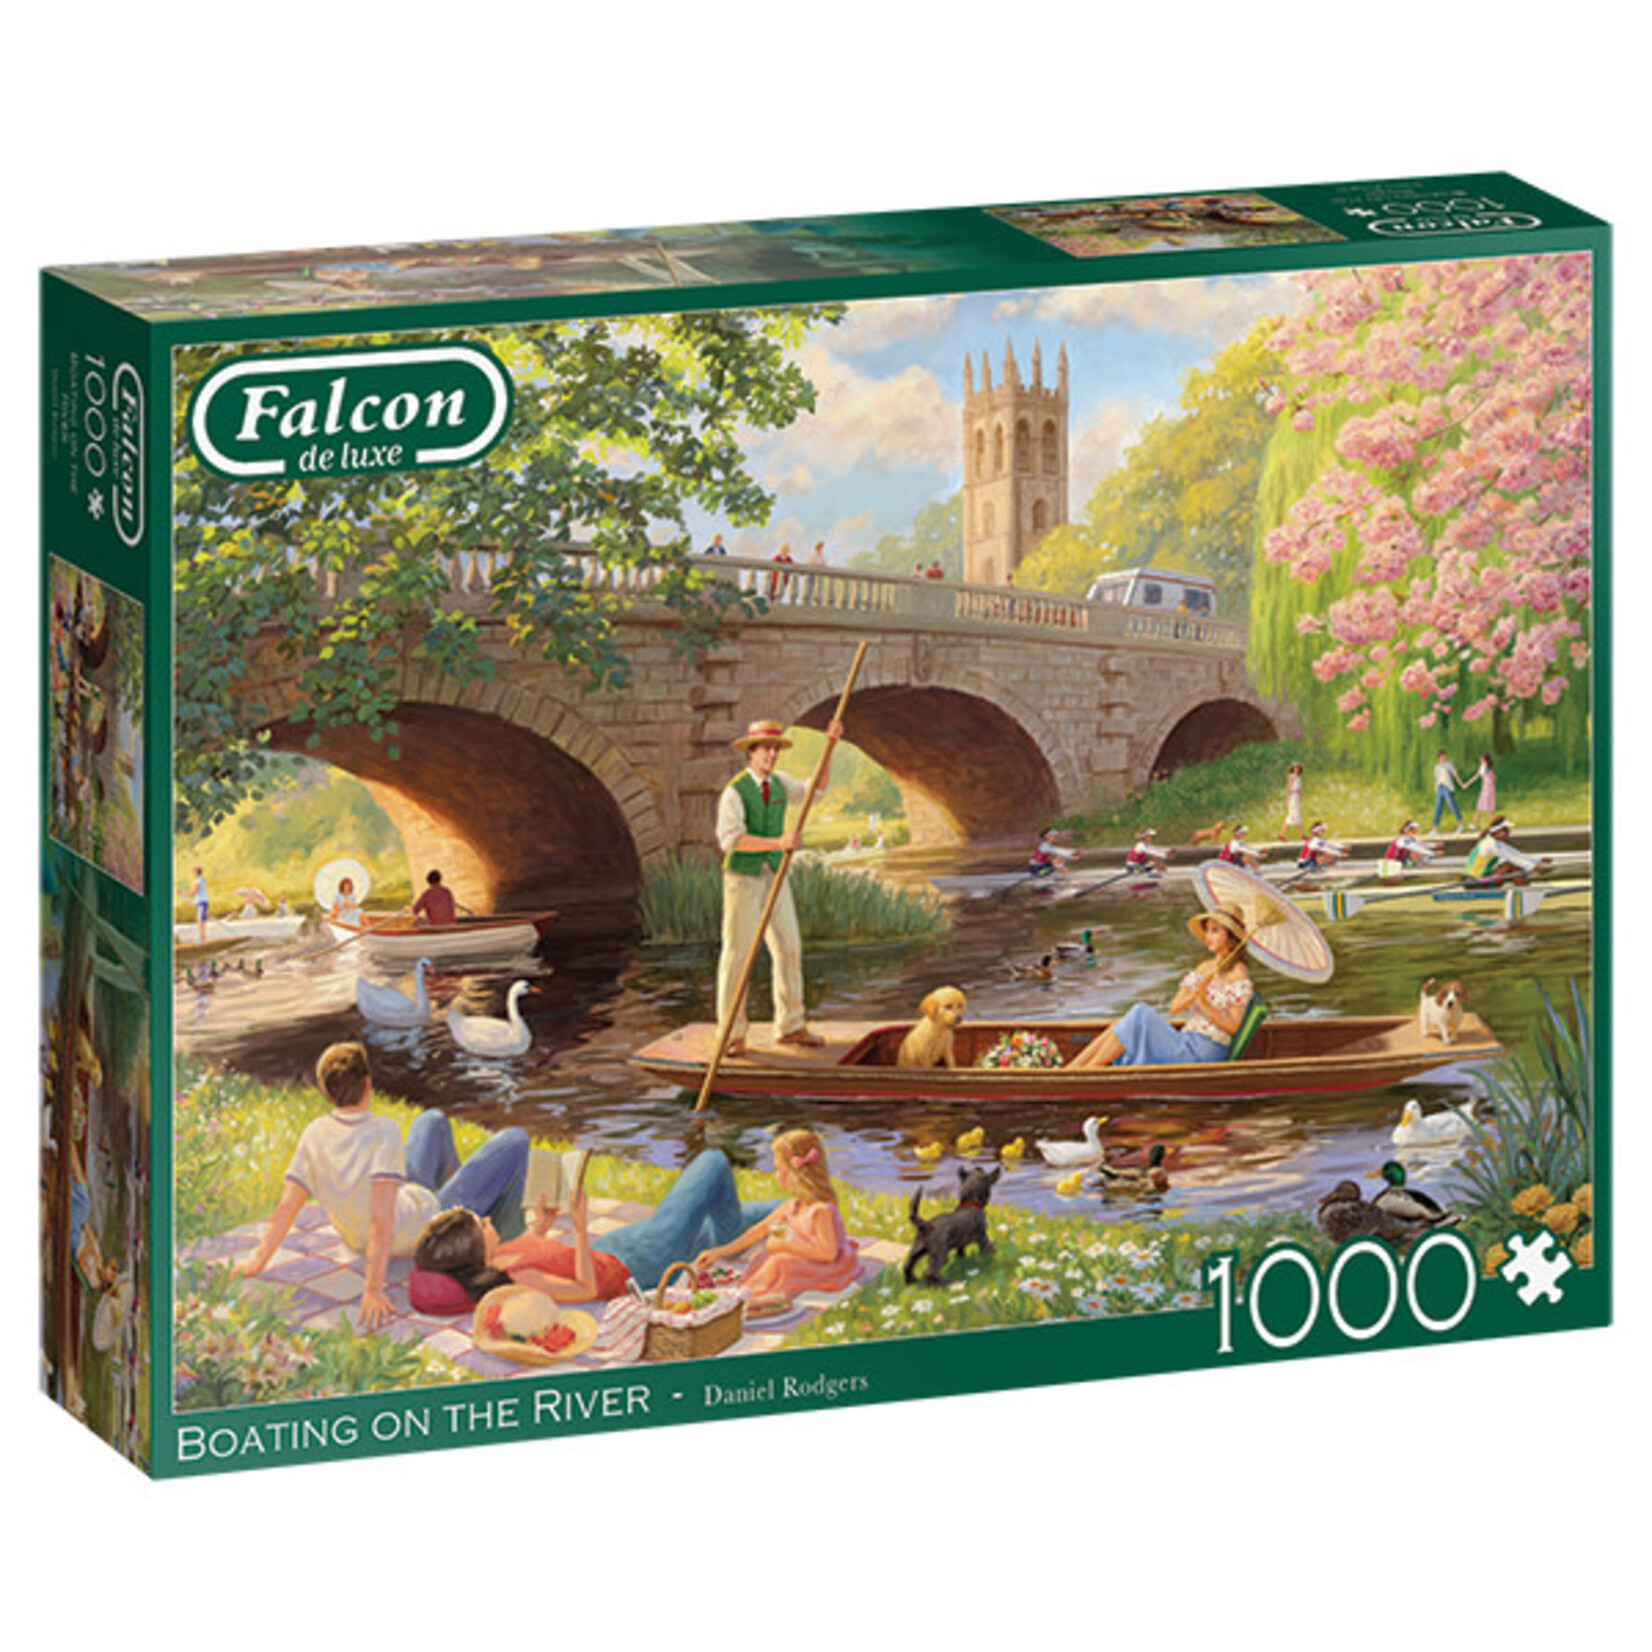 Falcon FAL11348 Boating on the River (Puzzle1000)